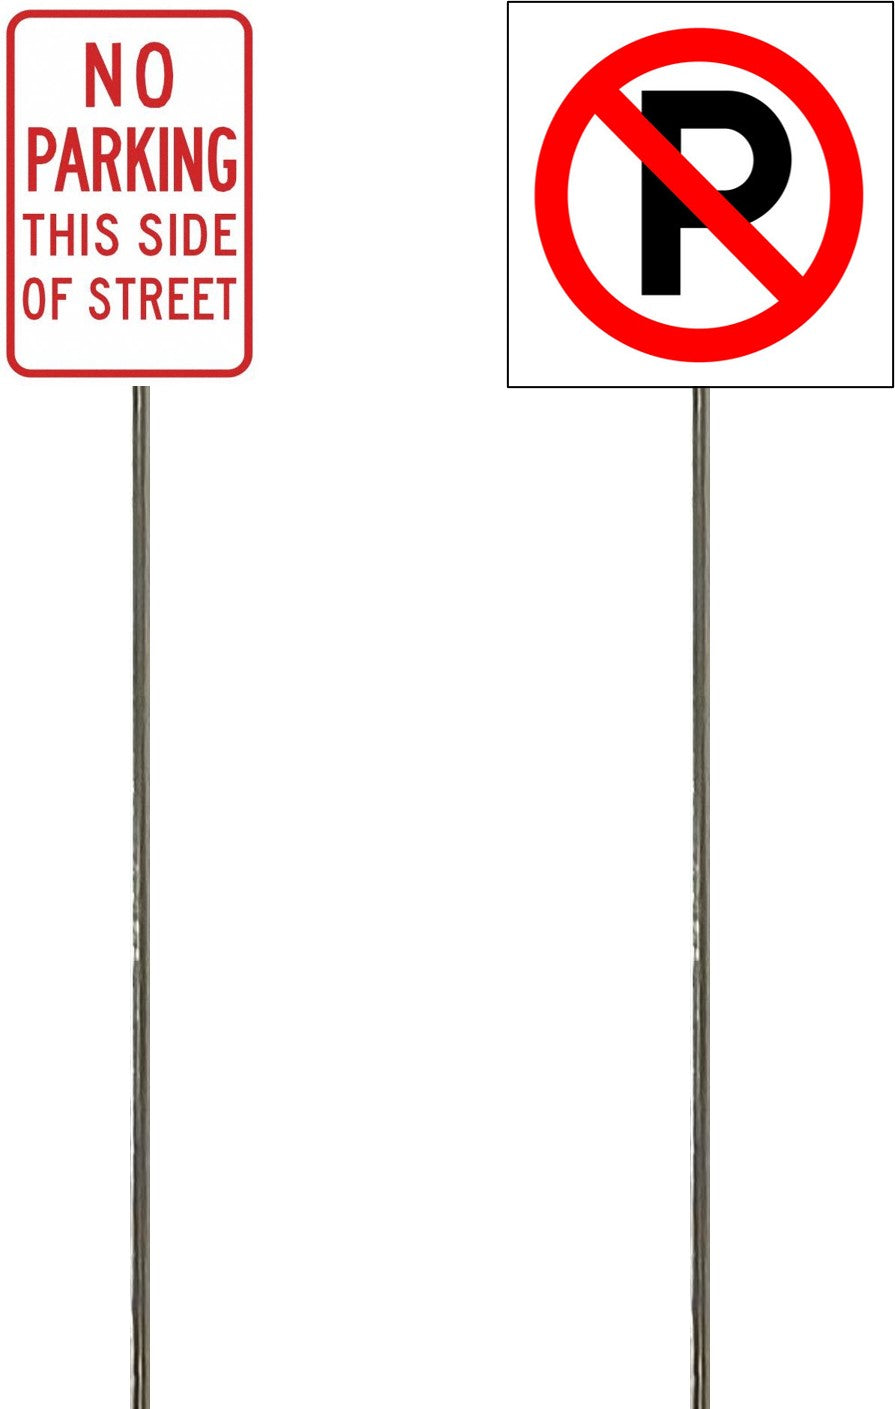 No Parking Signs - 4 pack variations